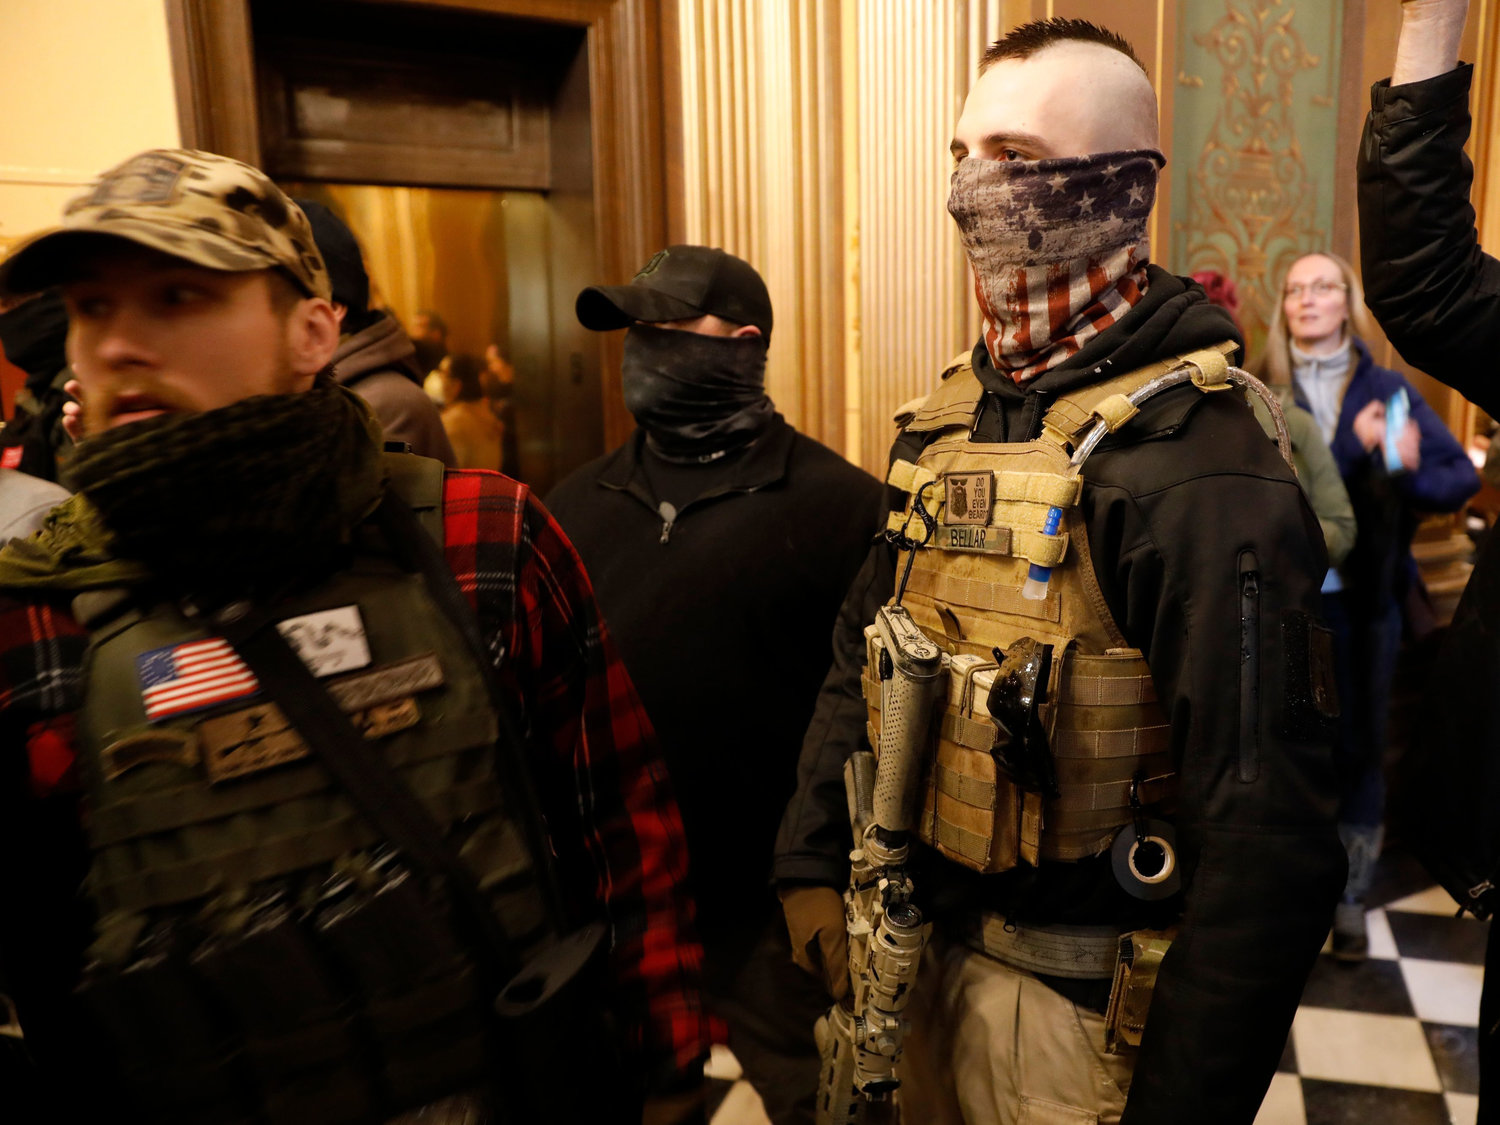 Armed militia members inside the state Capitol on April as part of a protest against Gov. Gretchen Whitmer's COVID-19 shutdown orders.